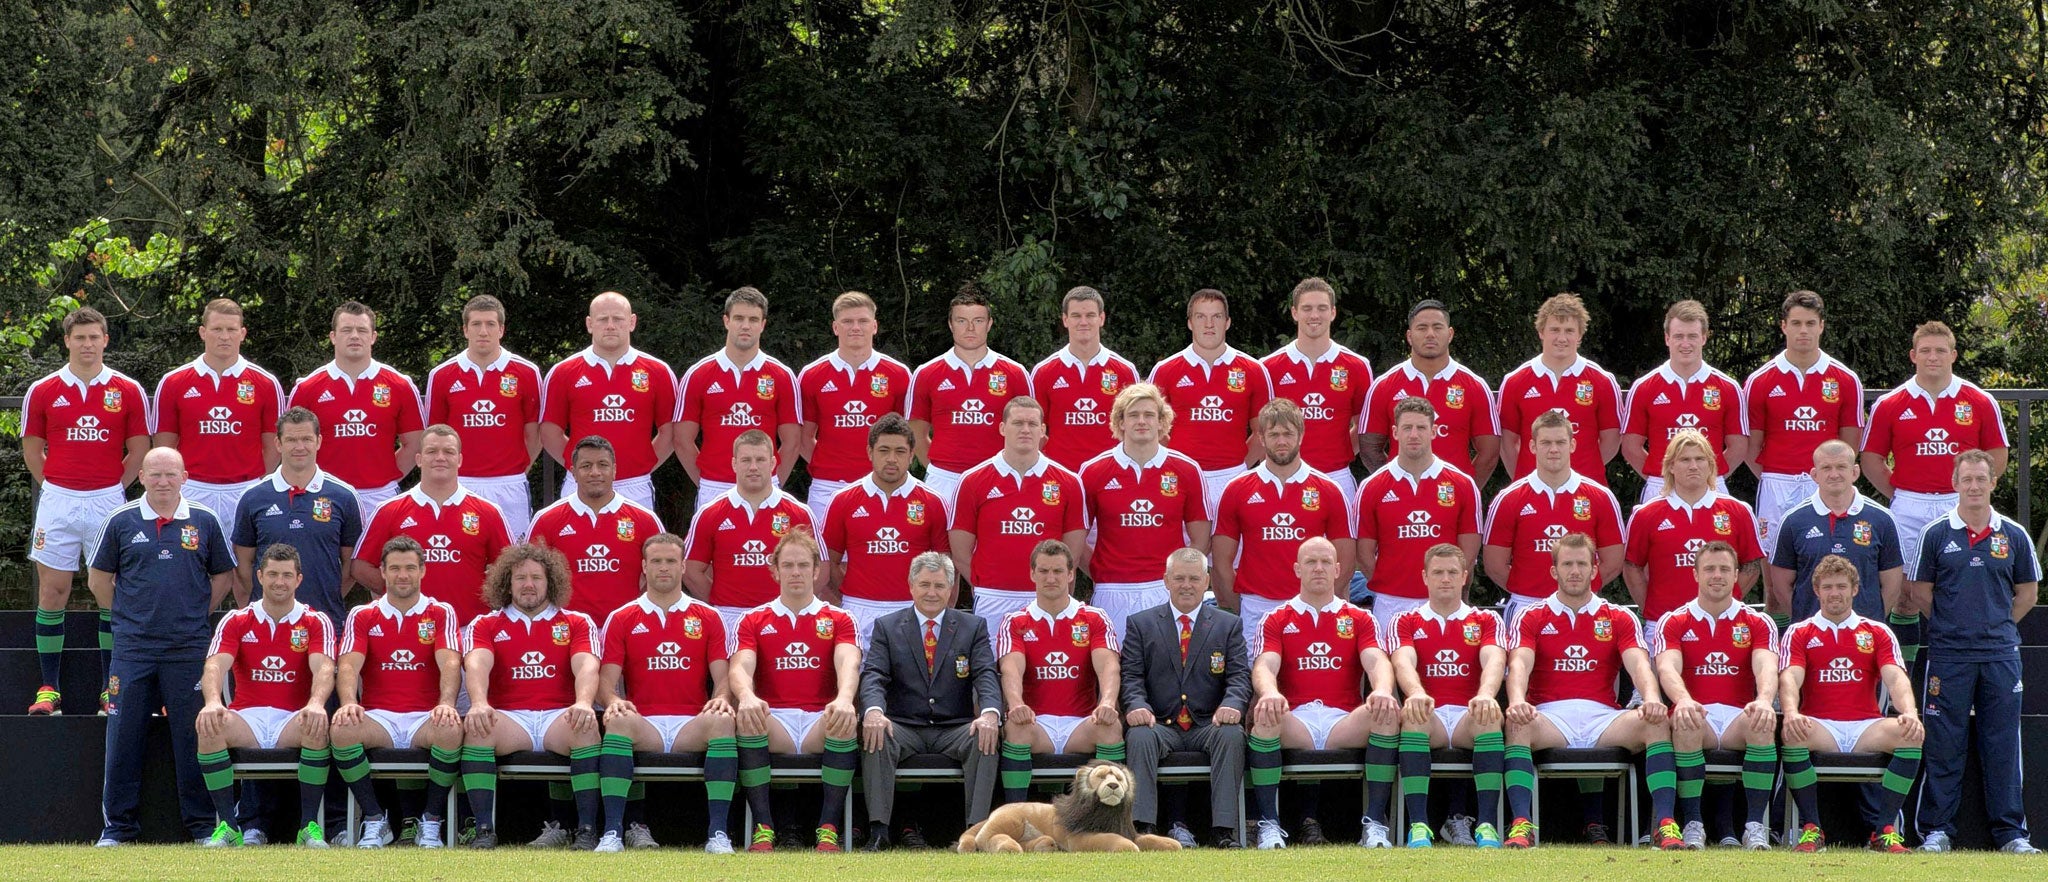 The Lions are flying to Australia imminently